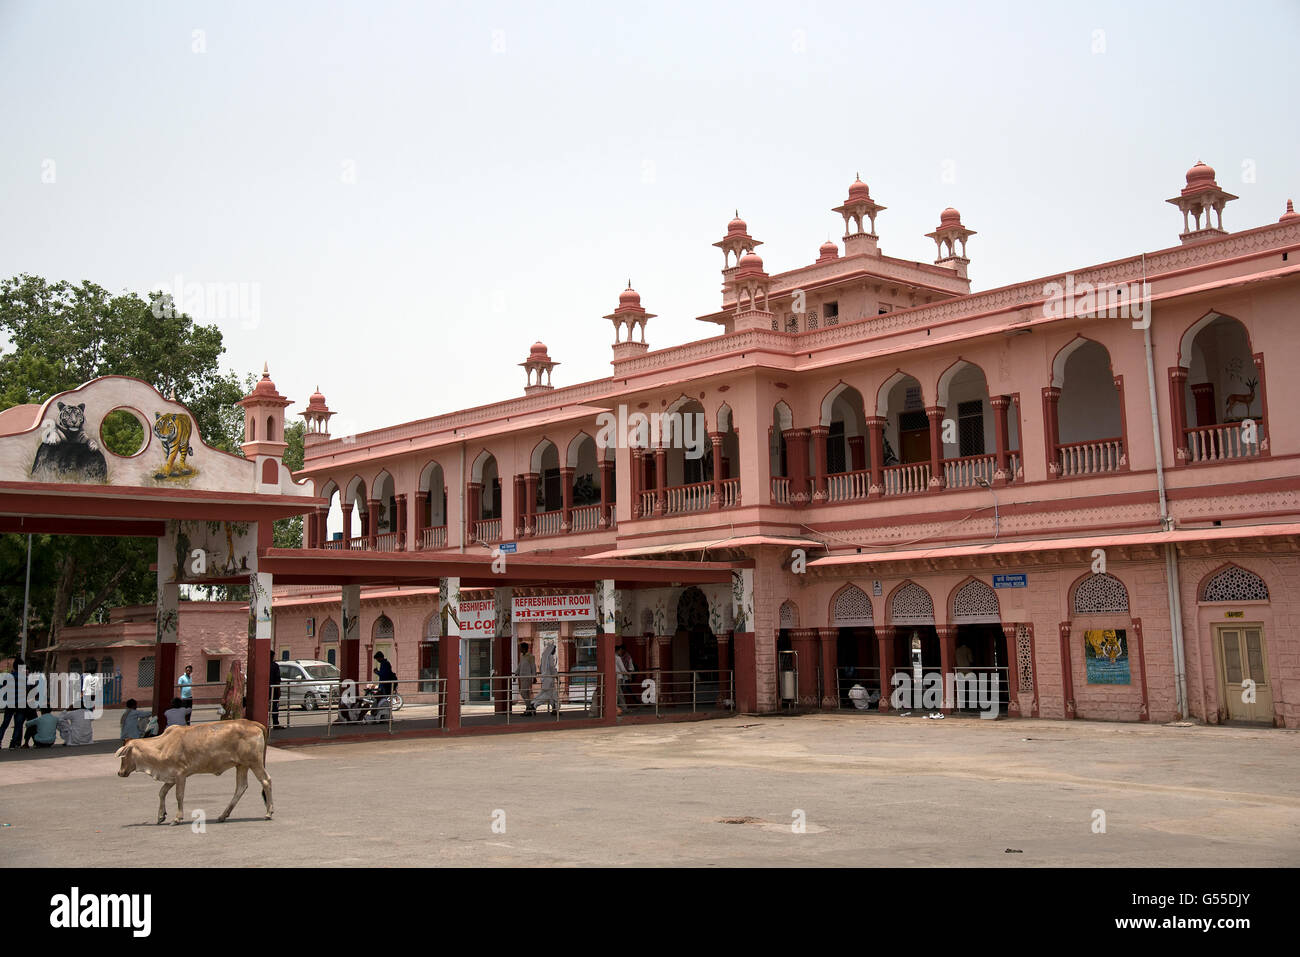 The image of Sawai Madhopur Railway station was taken in  India Stock Photo